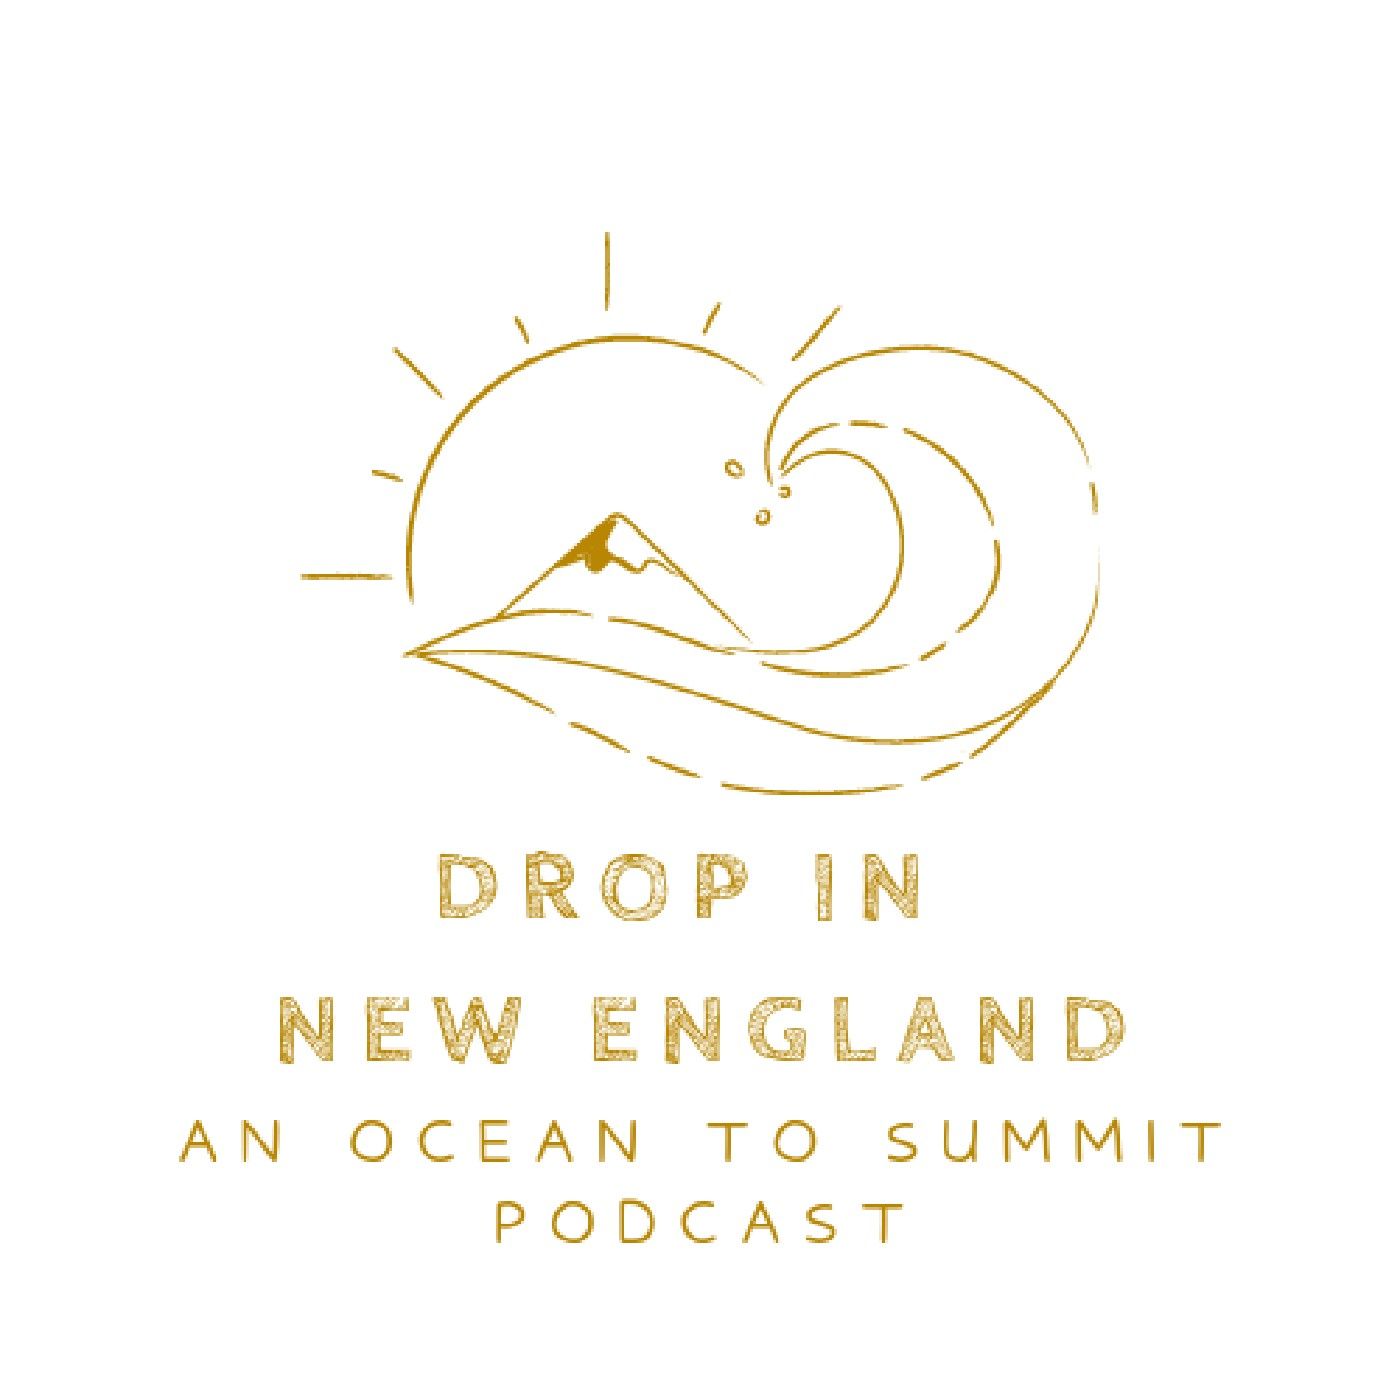 “DROP IN” New England